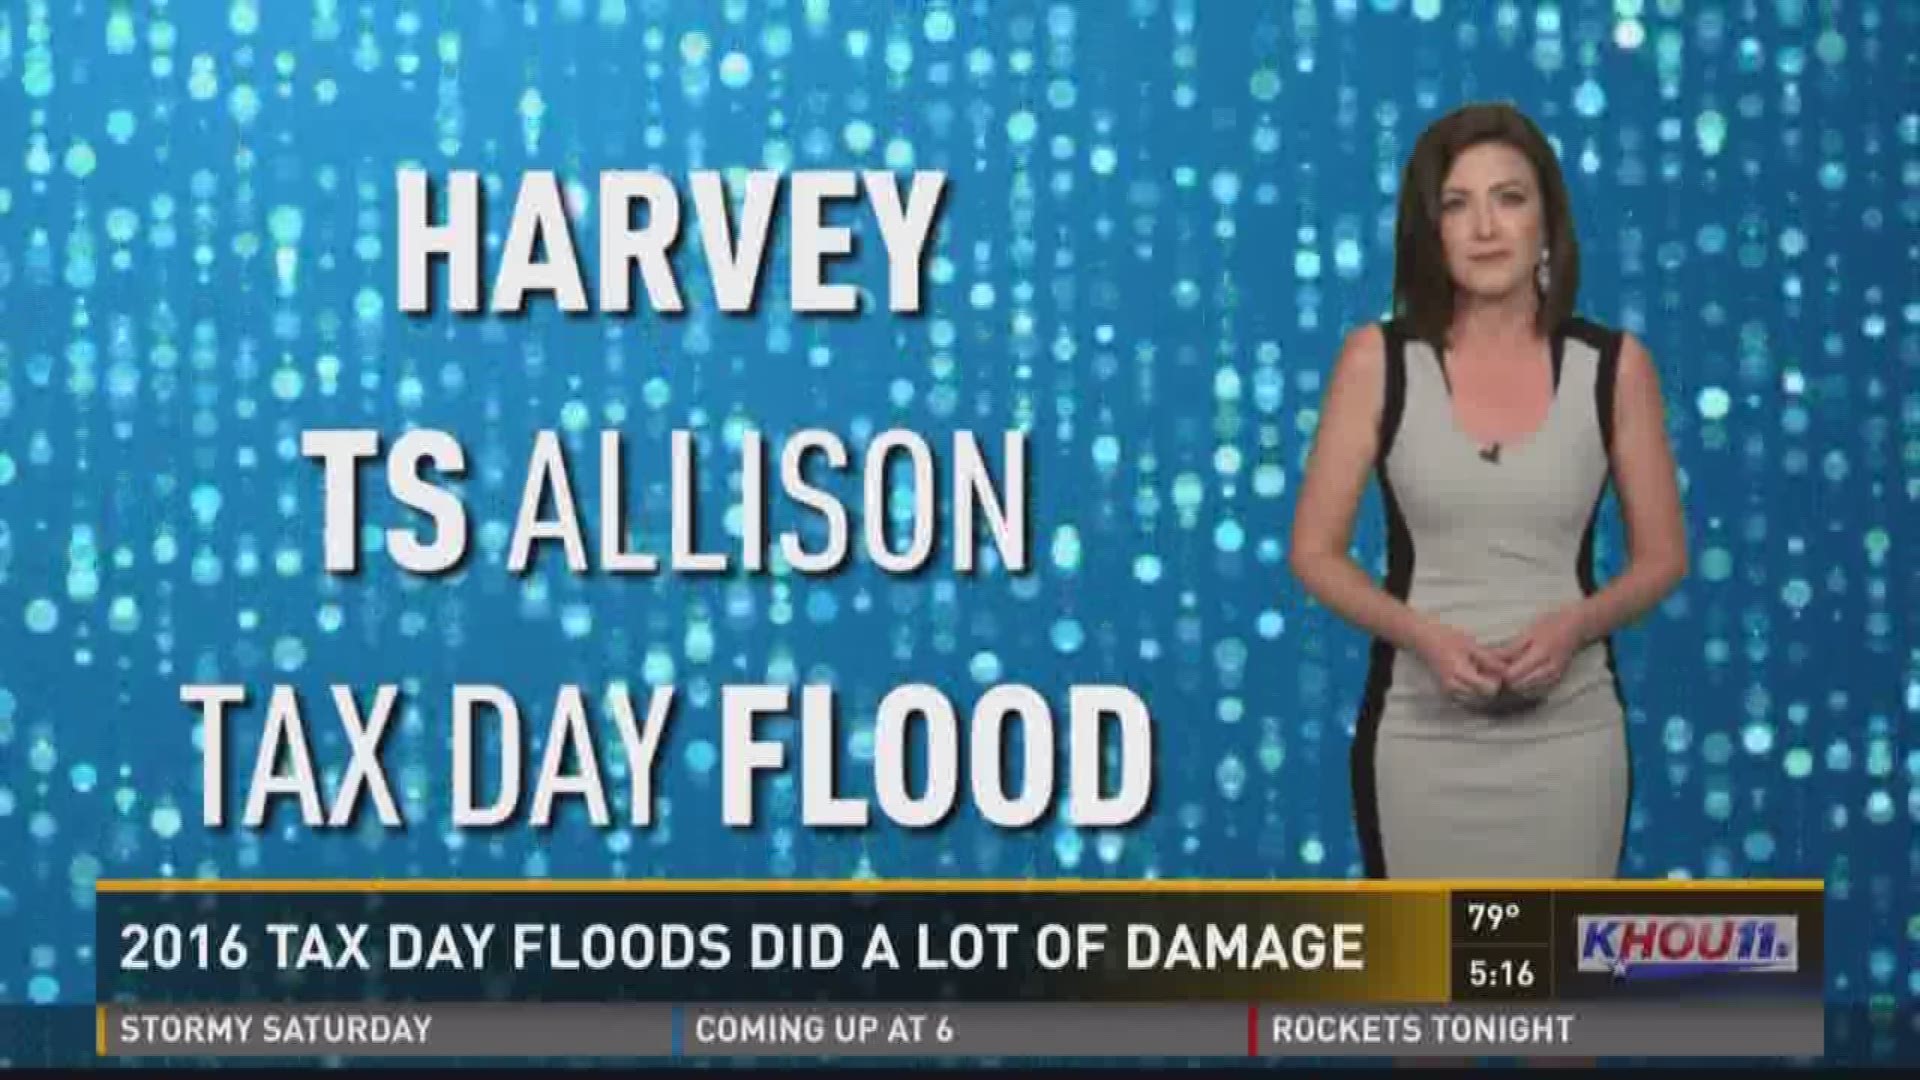 The Tax Day Floods of 2016 dumped billions of water on Houston. KHOU's Brandi Smith gives us some perspective on the 2-year anniversary of the gigantic storm.